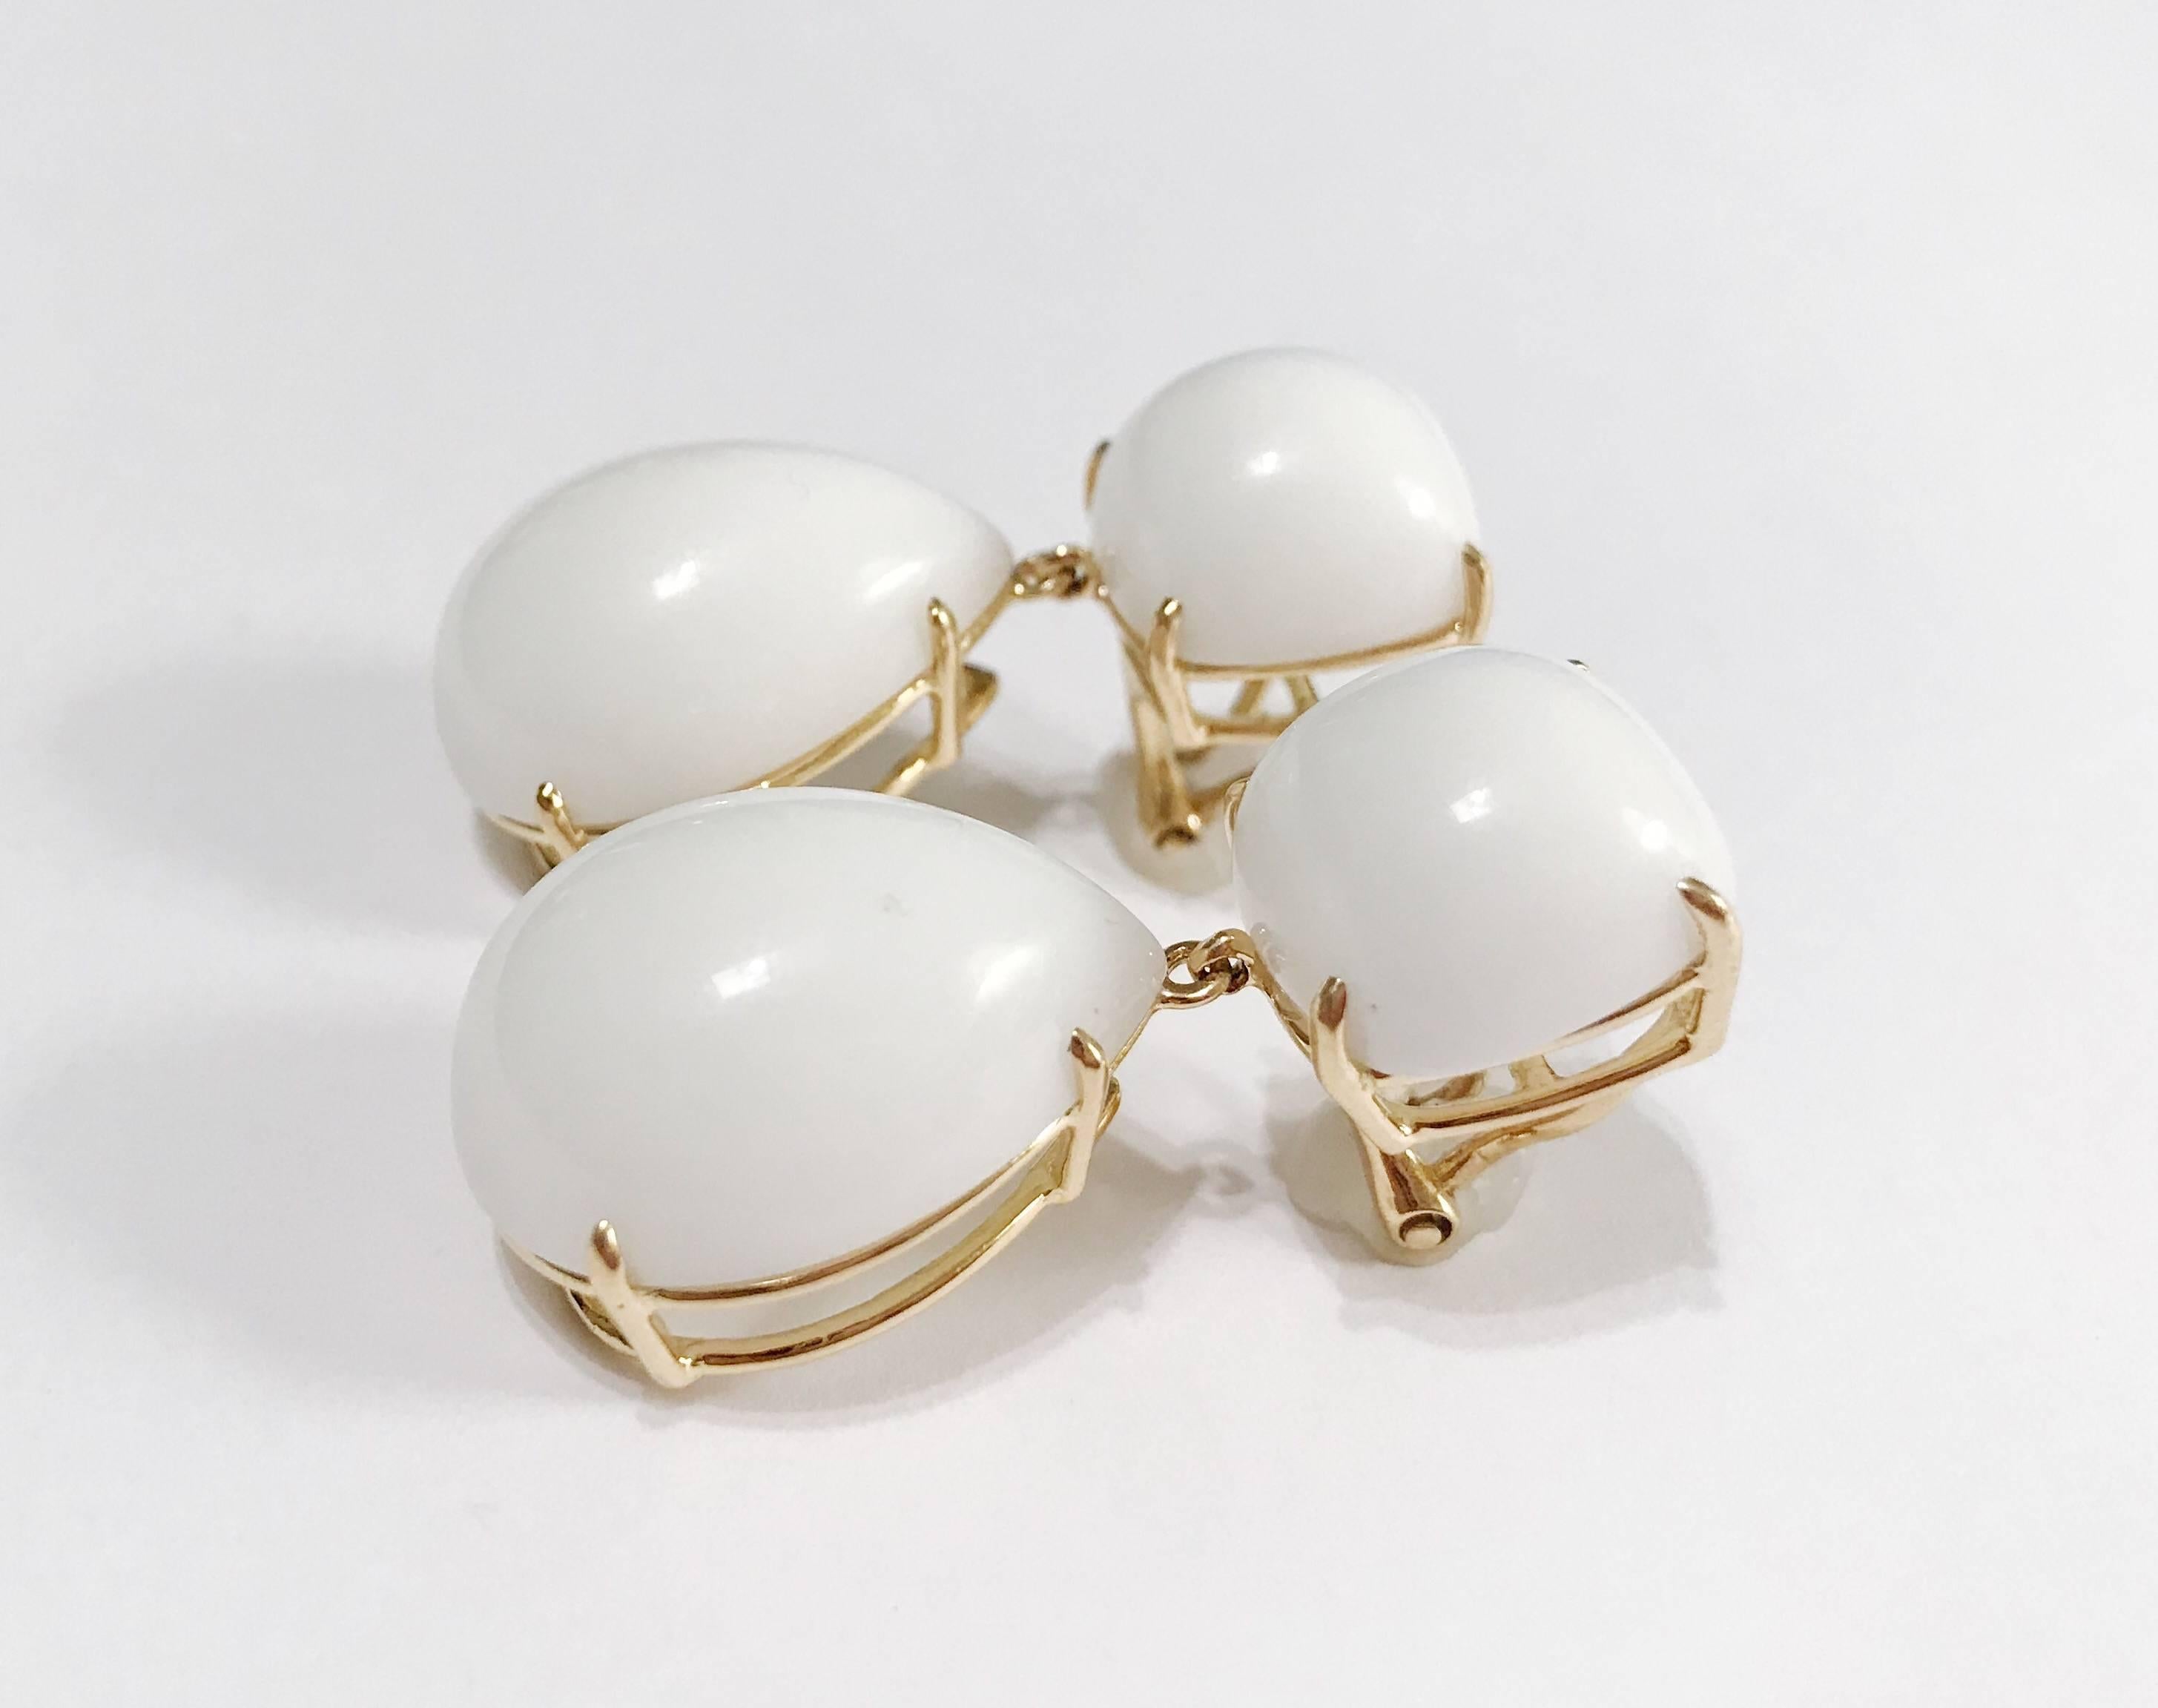 Elegant 18kt Yellow Gold Pear Drop Earring with White Jade is excellent statement piece. 

The meaning measures 1.5 inches tall and 1/2 inch wide.

This Pear Drop earring is available in any color stone combination in either Yellow Gold, Rose Gold,